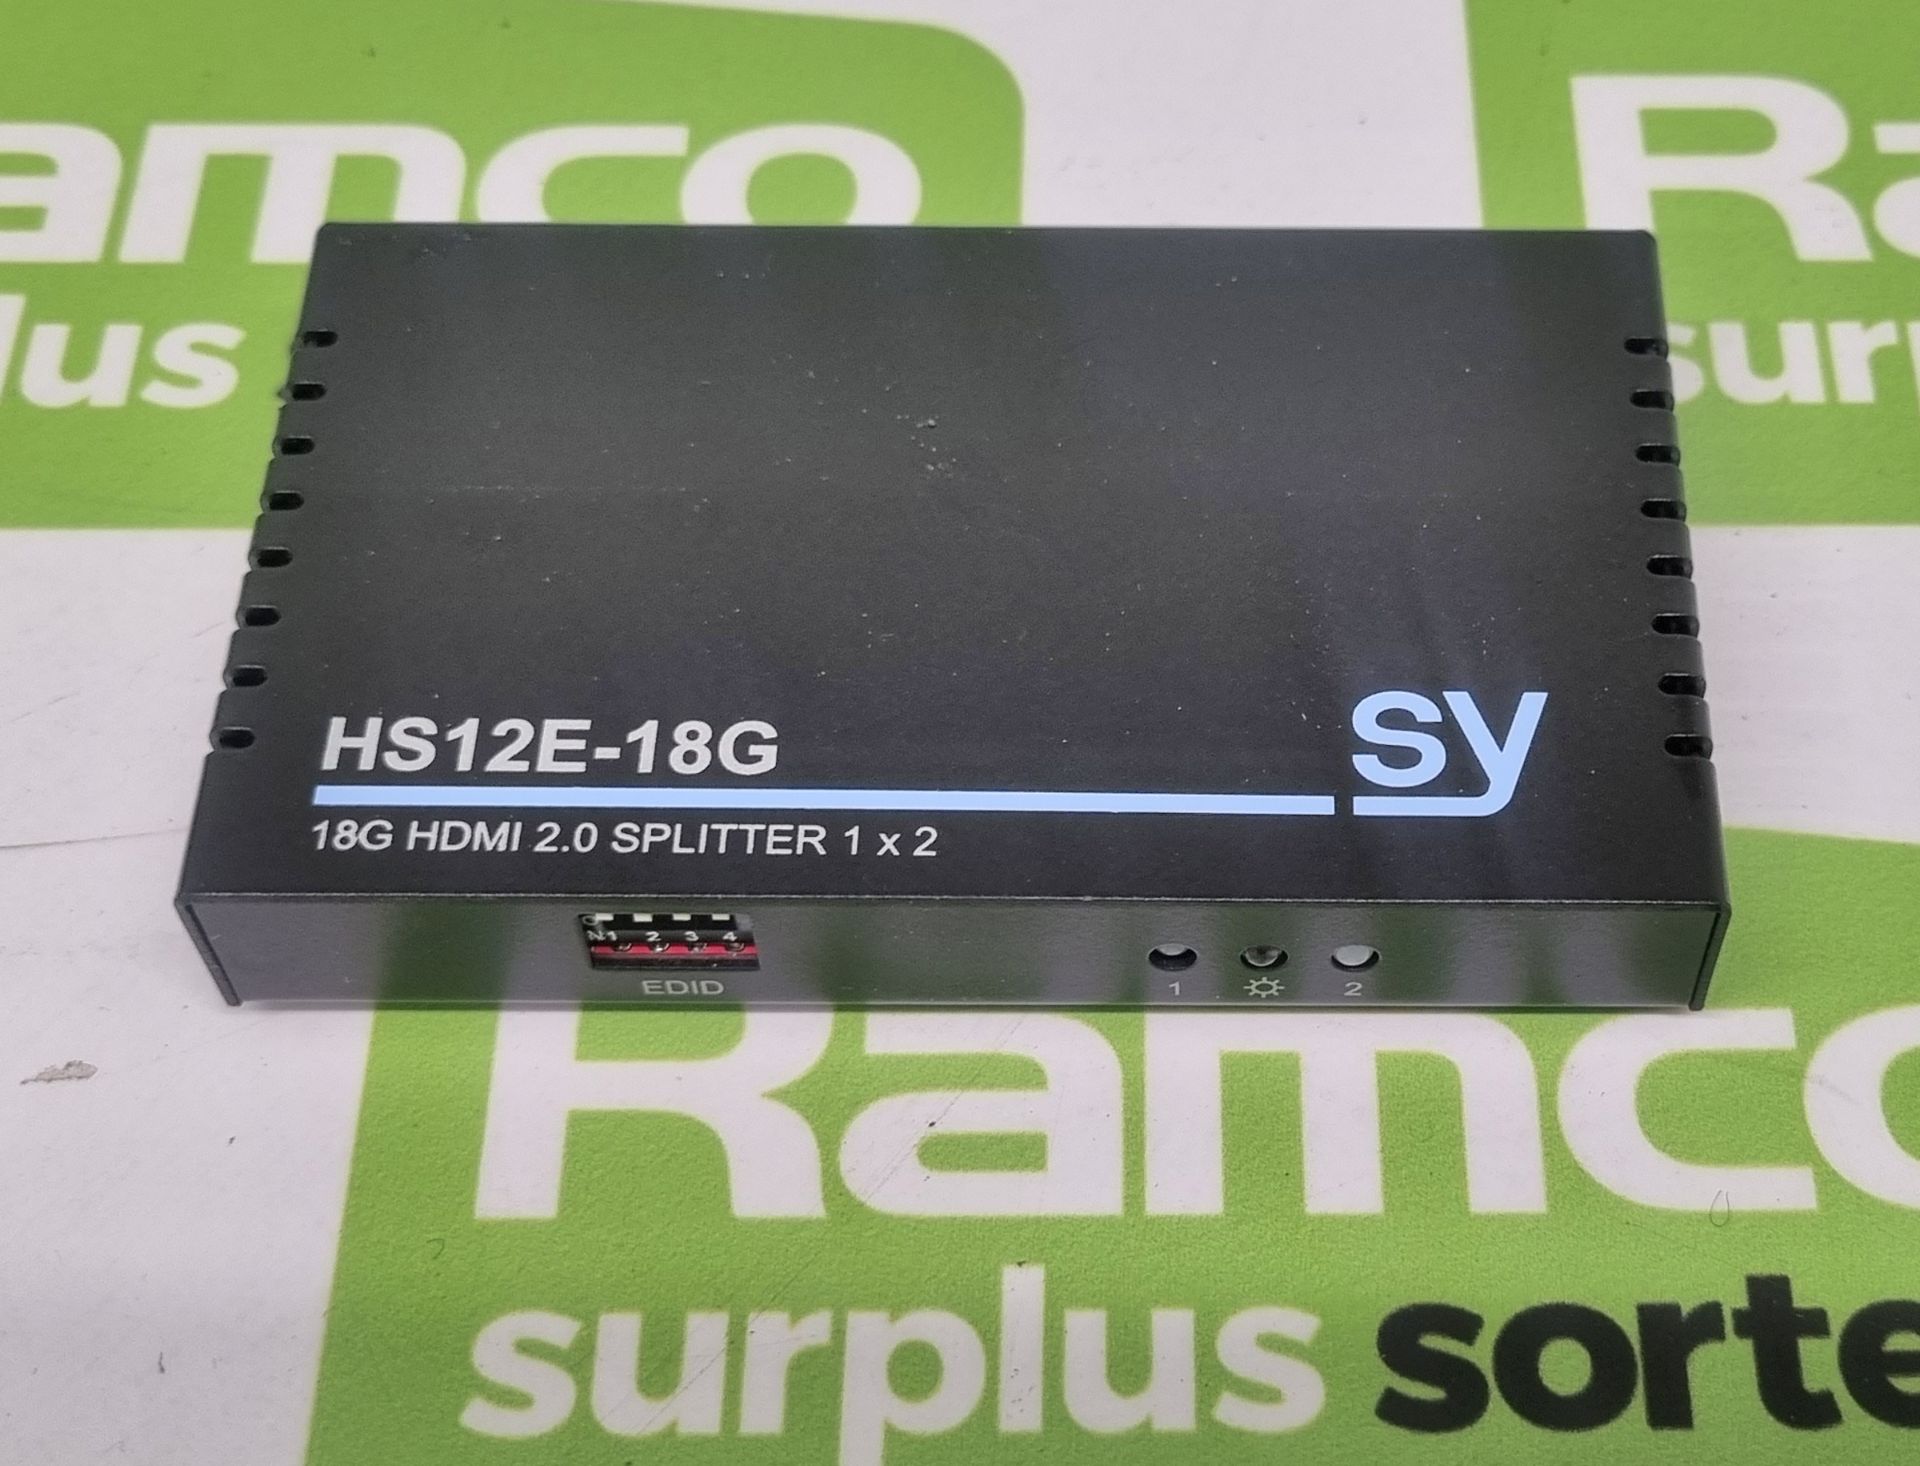 SY-HS12E-18G 1x2 HDMI 2.0 (18Gbps) splitter - Image 3 of 6